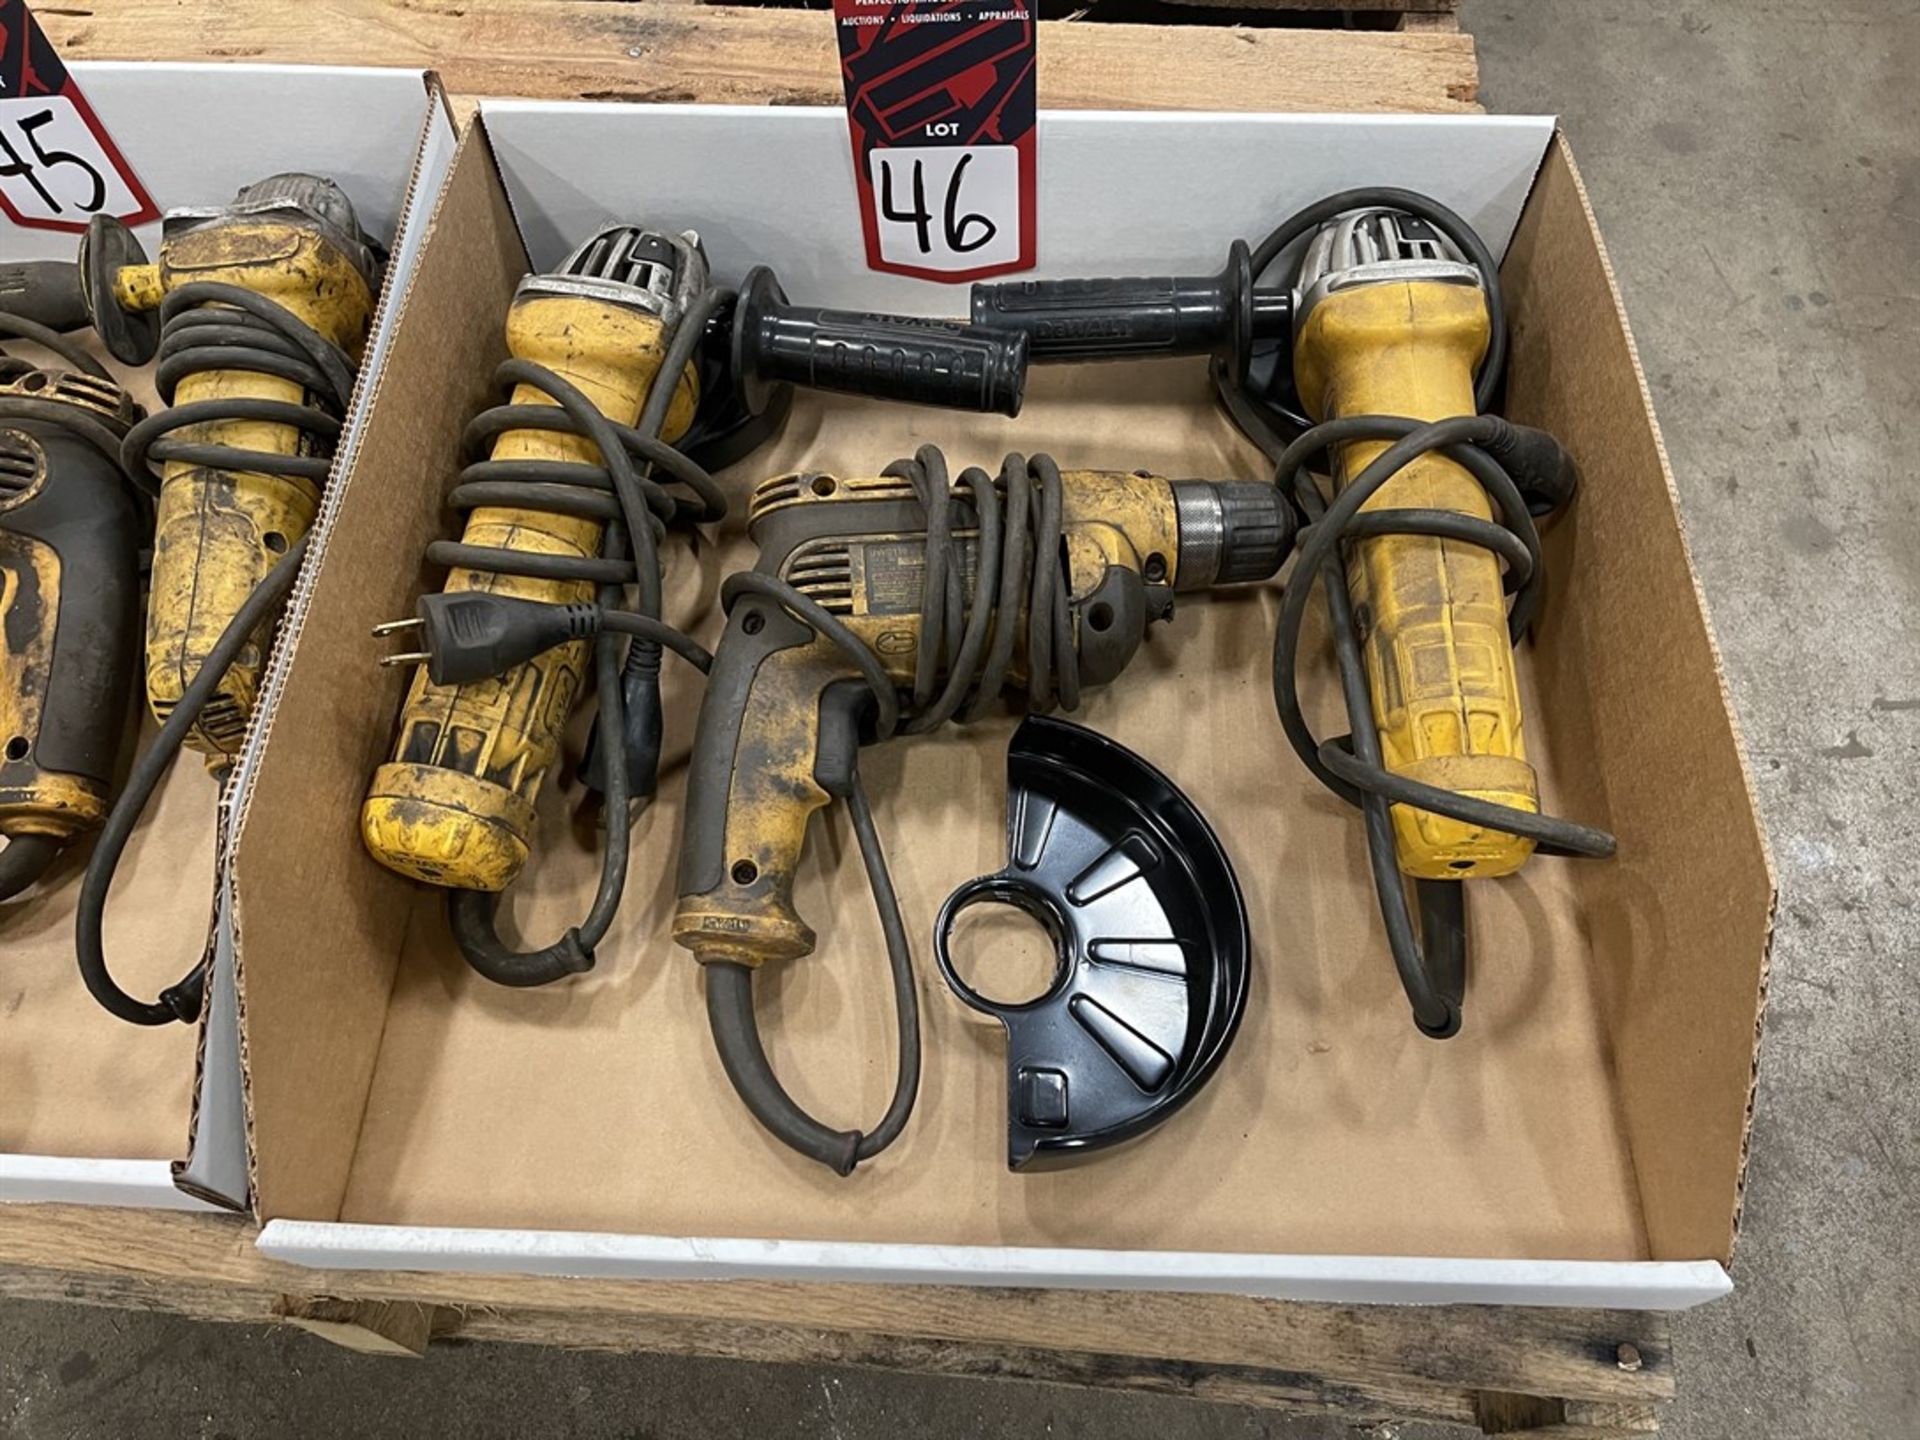 Lot of DEWALT Electric Drills and Angle Grinders